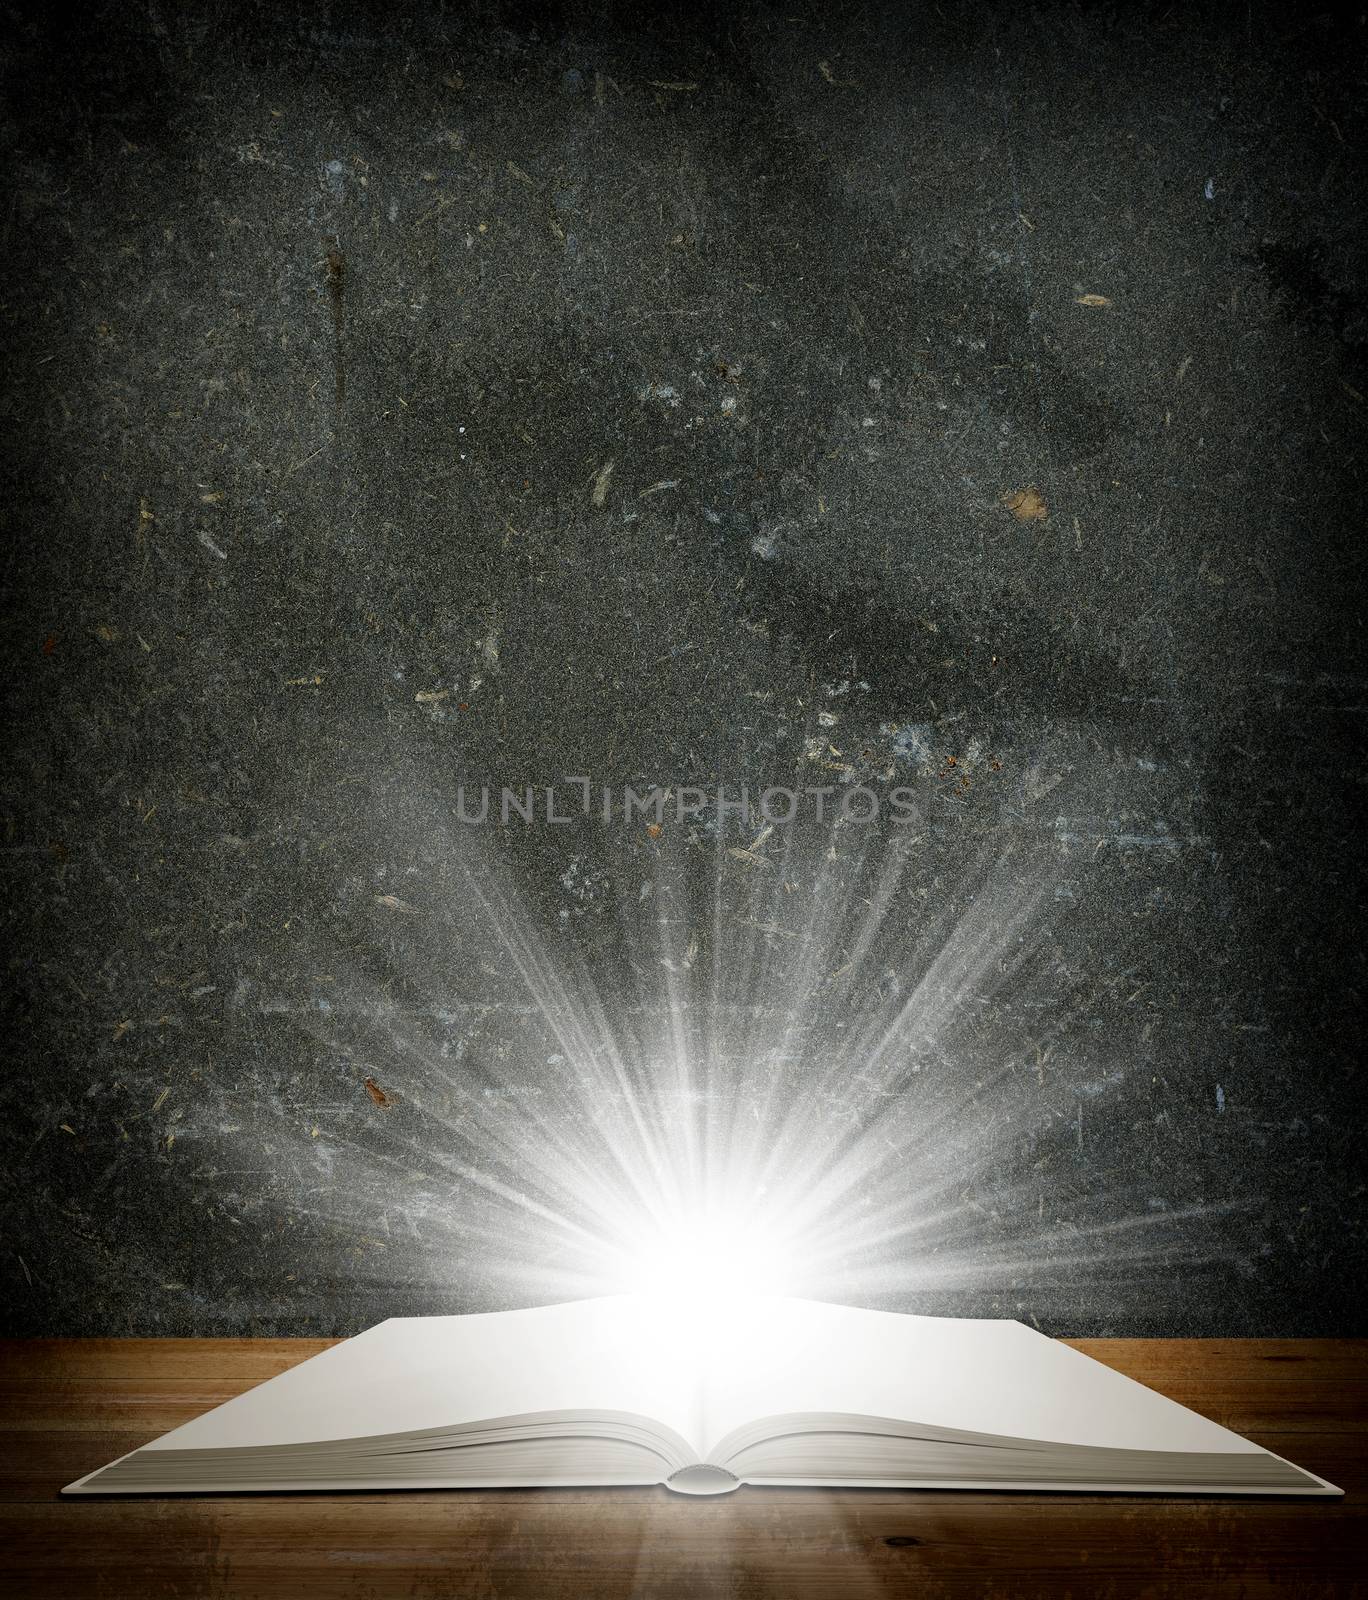 Open book lying on the floor. Floor and wall in grunge style